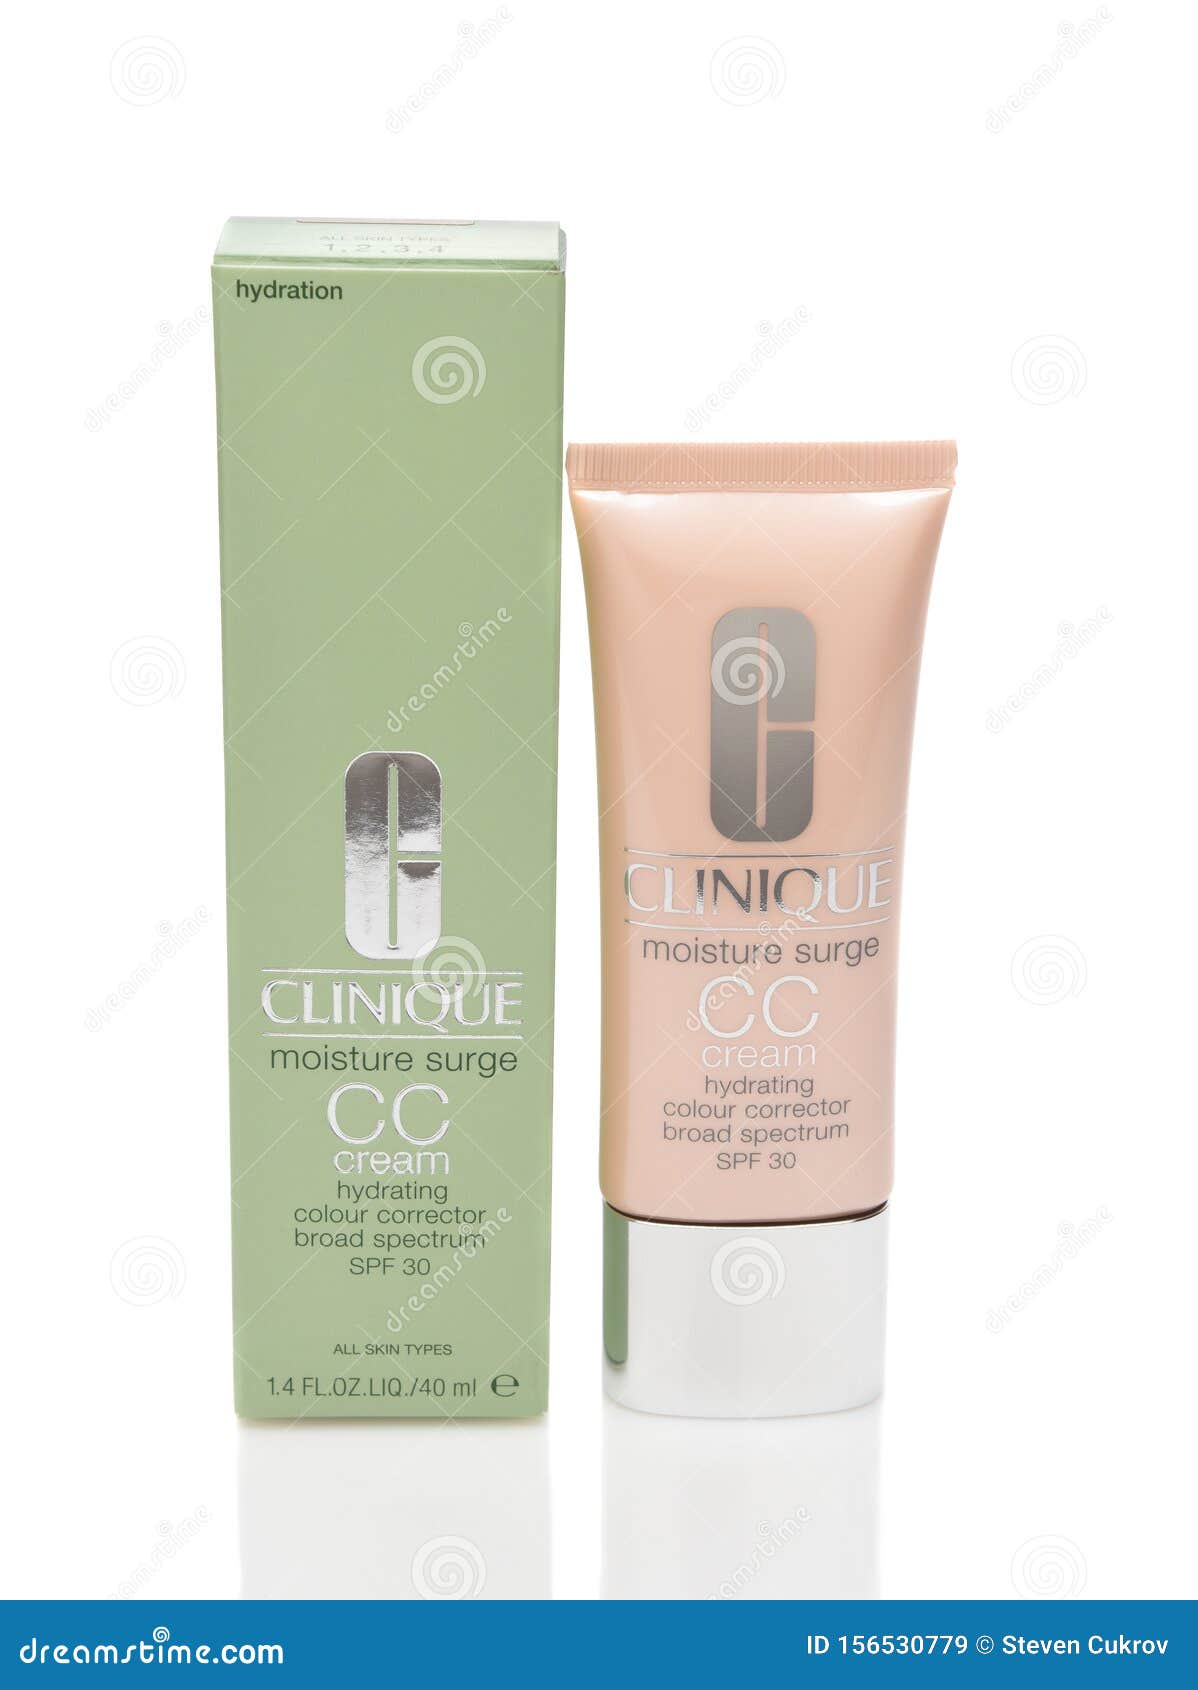 A Bottle of Clinique Moisture Surge CC Cream, Hydrating Colour Corrector  Editorial Stock Image - Image of reflection, care: 156530779